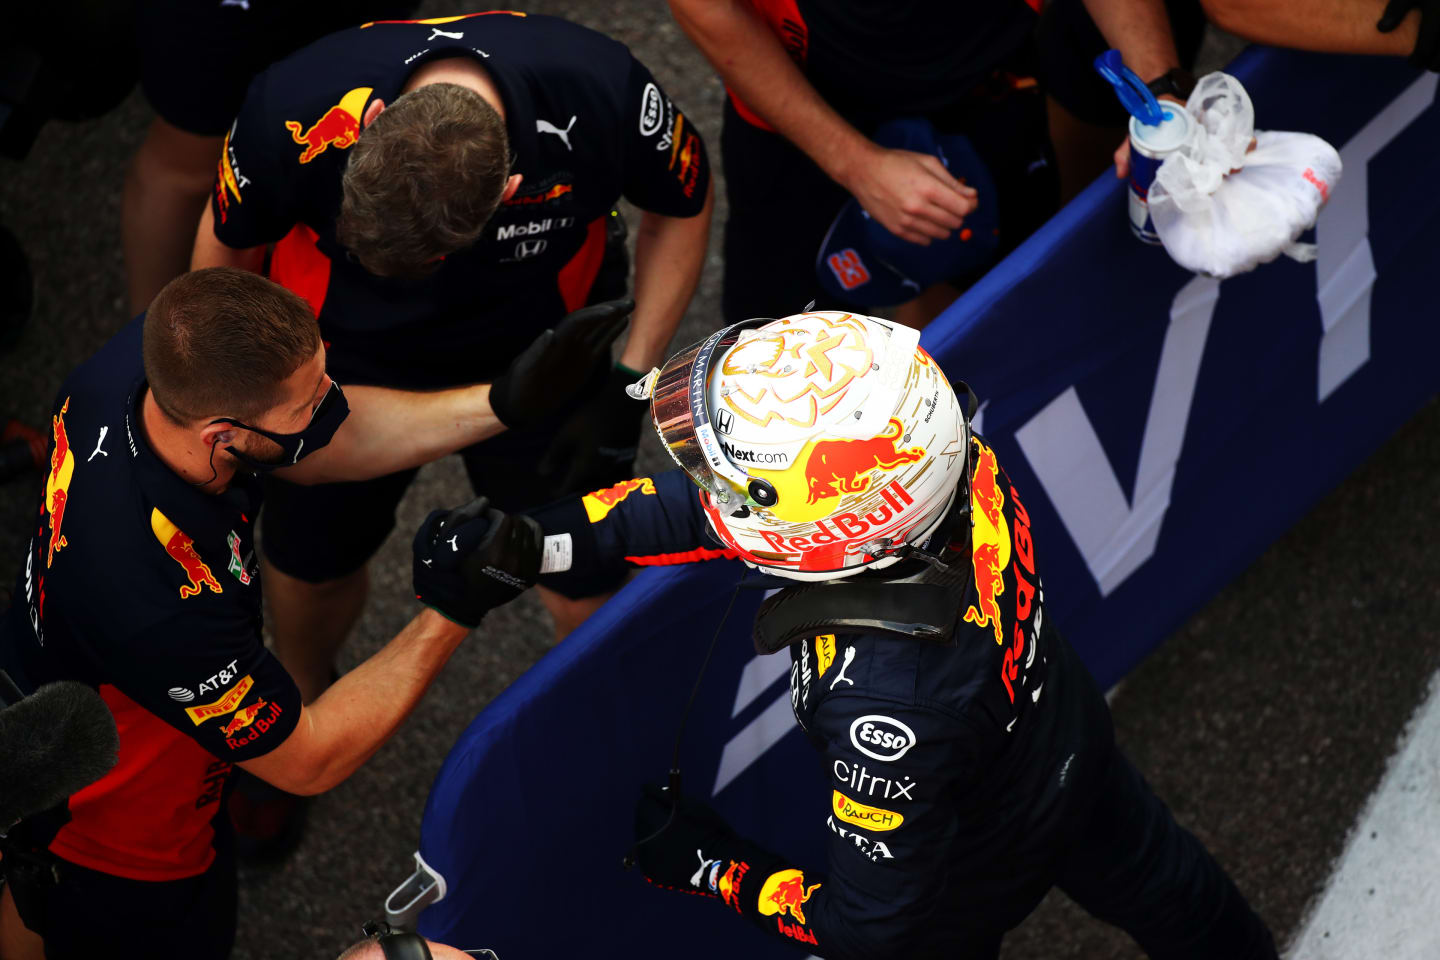 SOCHI, RUSSIA - SEPTEMBER 26: Second placed qualifier Max Verstappen of Netherlands and Red Bull Racing celebrates with teammates in parc ferme during qualifying ahead of the F1 Grand Prix of Russia at Sochi Autodrom on September 26, 2020 in Sochi, Russia. (Photo by Bryn Lennon/Getty Images)